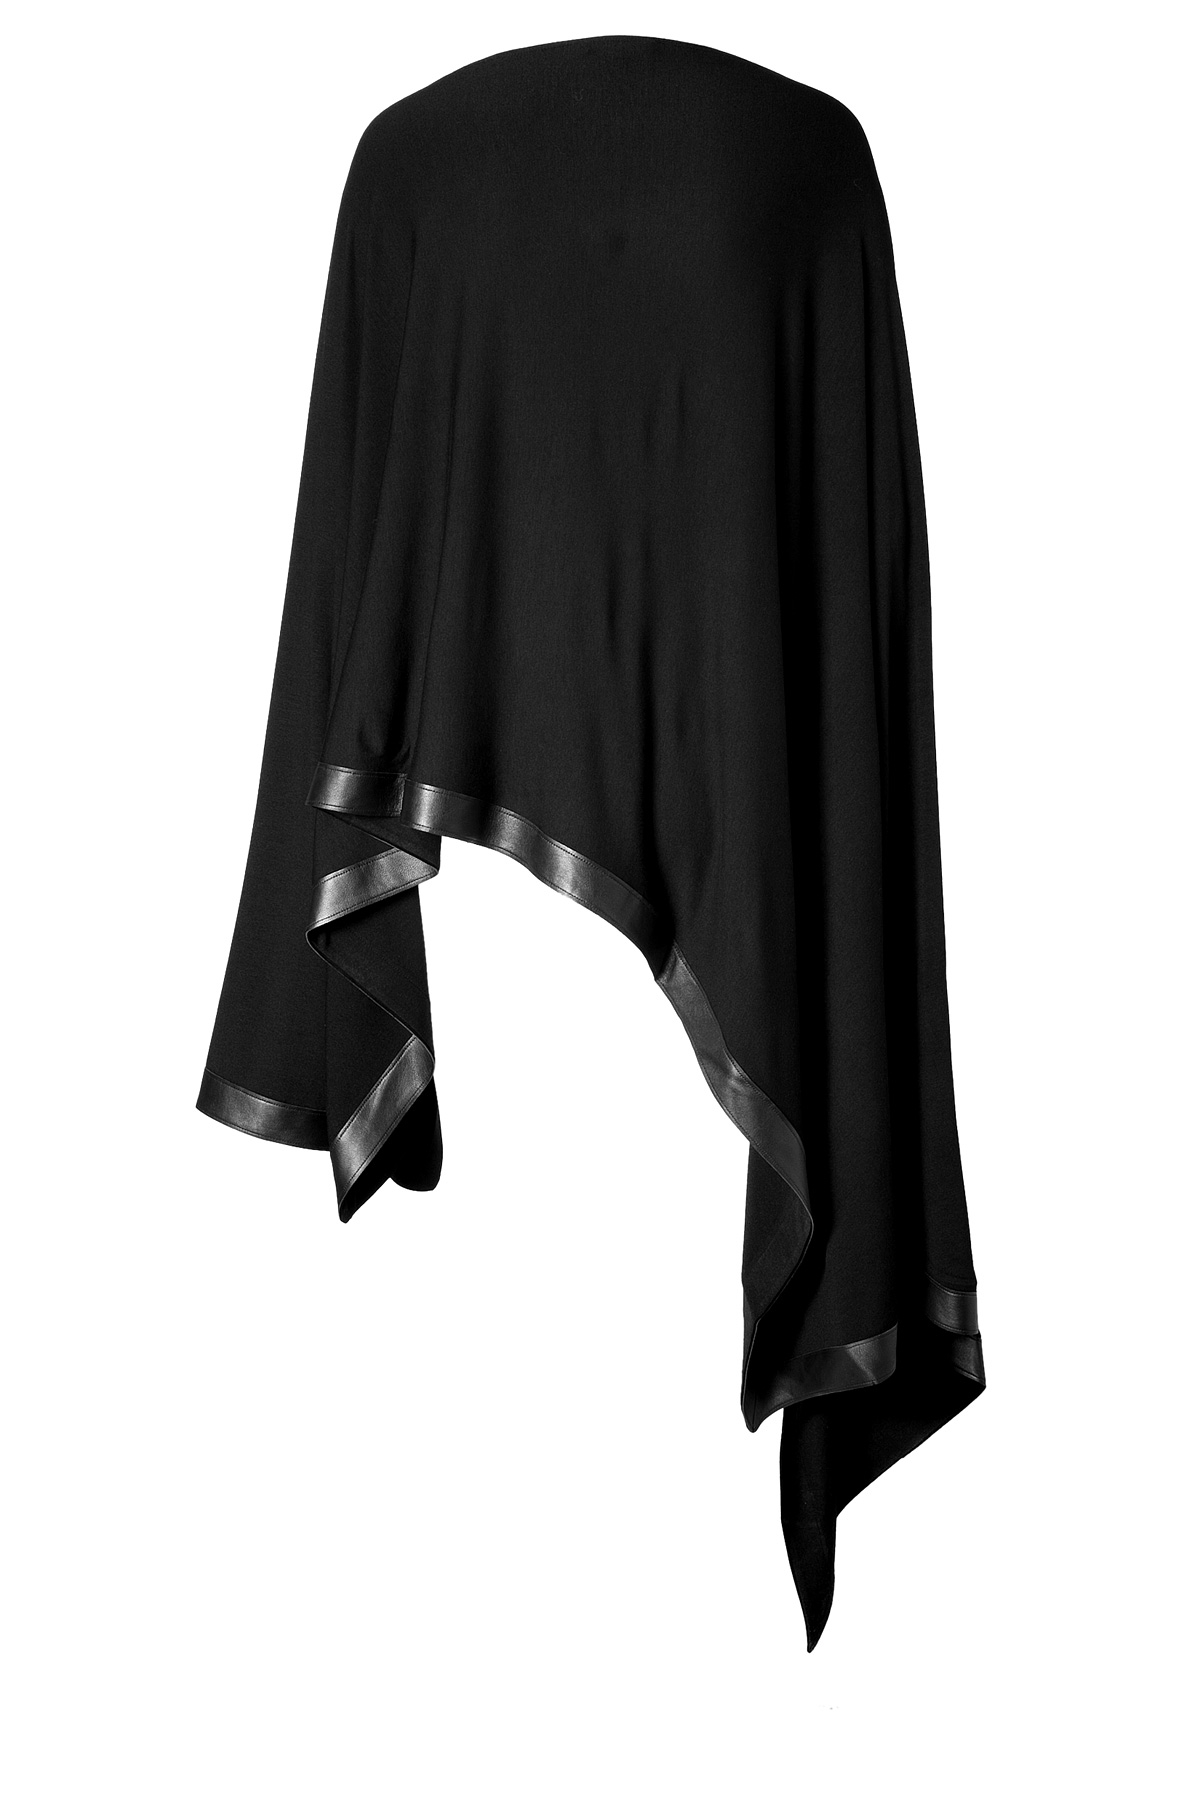 Donna karan Poncho with Leather Trim in Black in Black | Lyst